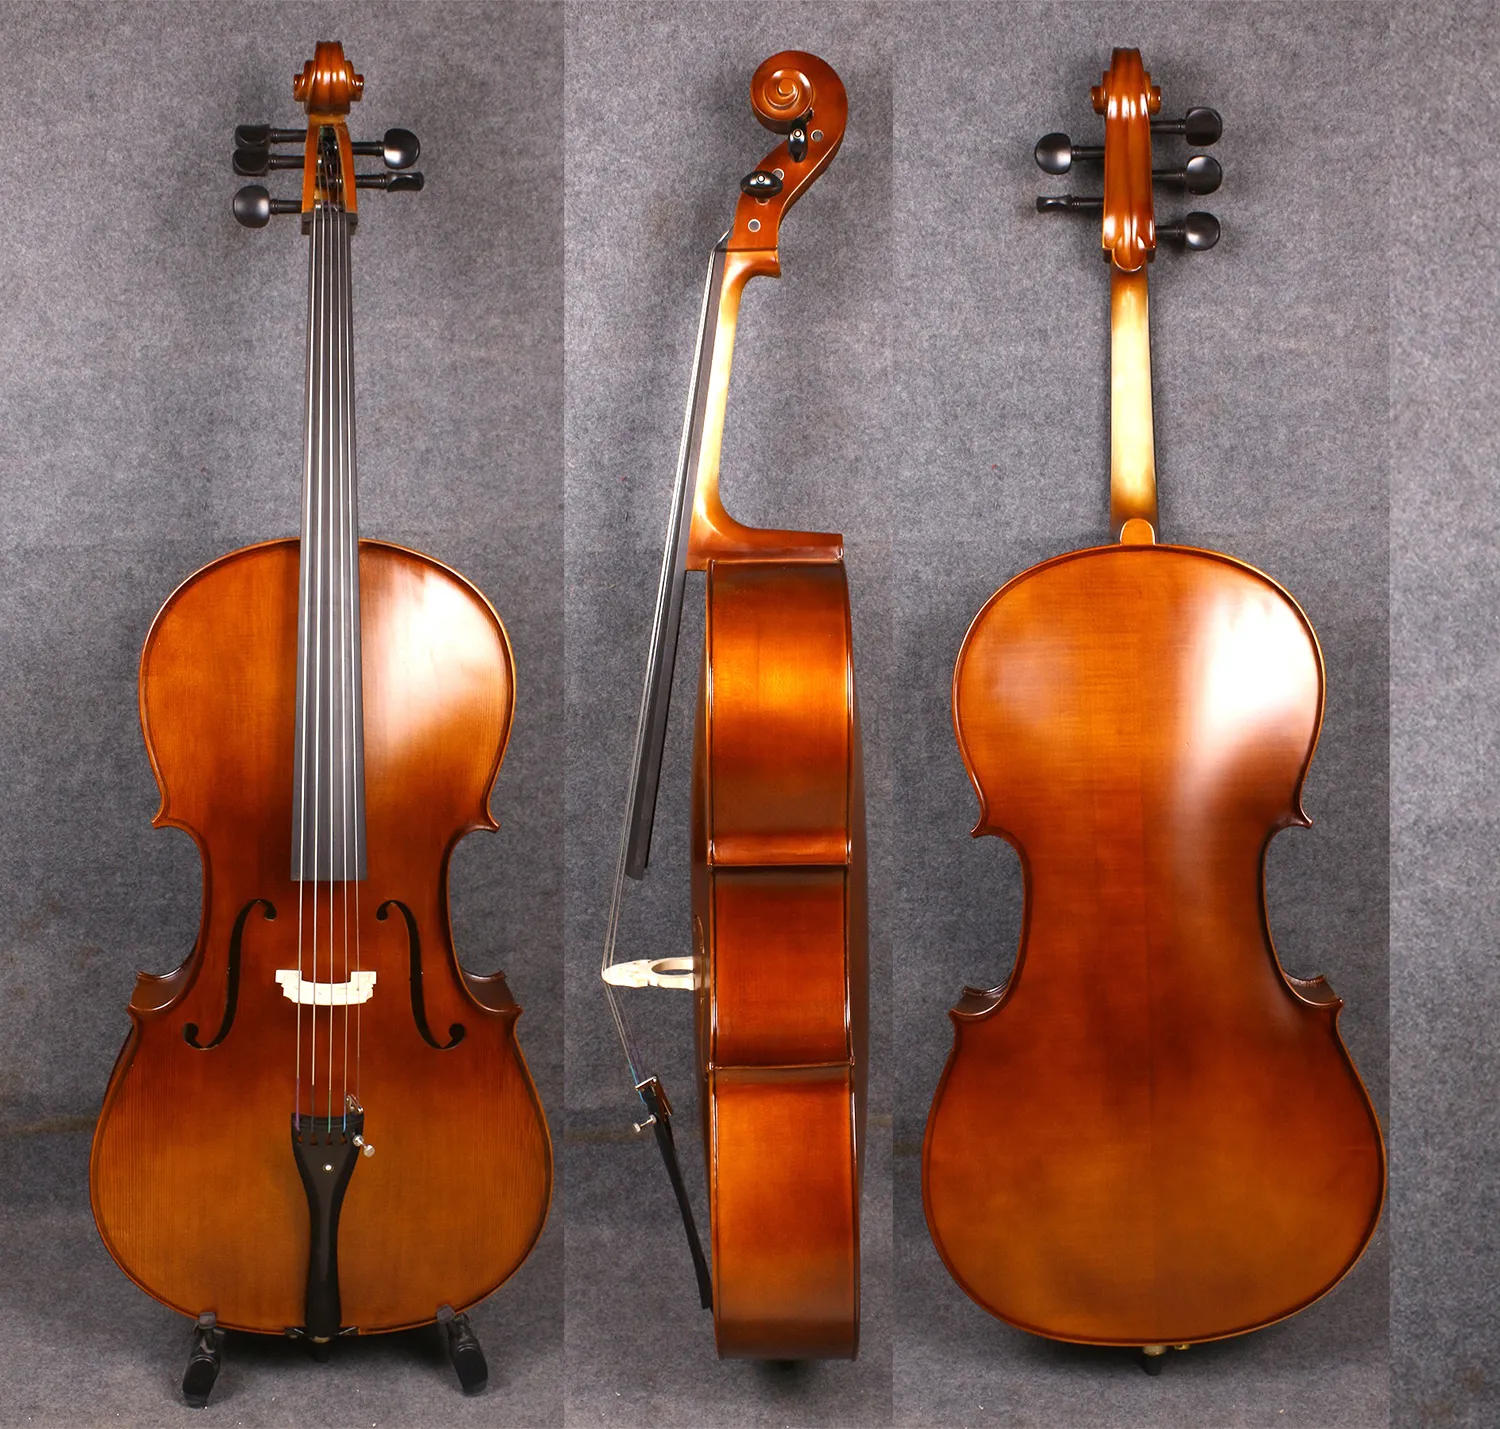 Yinfente 4/4 5 string Cello Full size Spruce Maple wood Ebony cello parts Free bag bow Hand Made